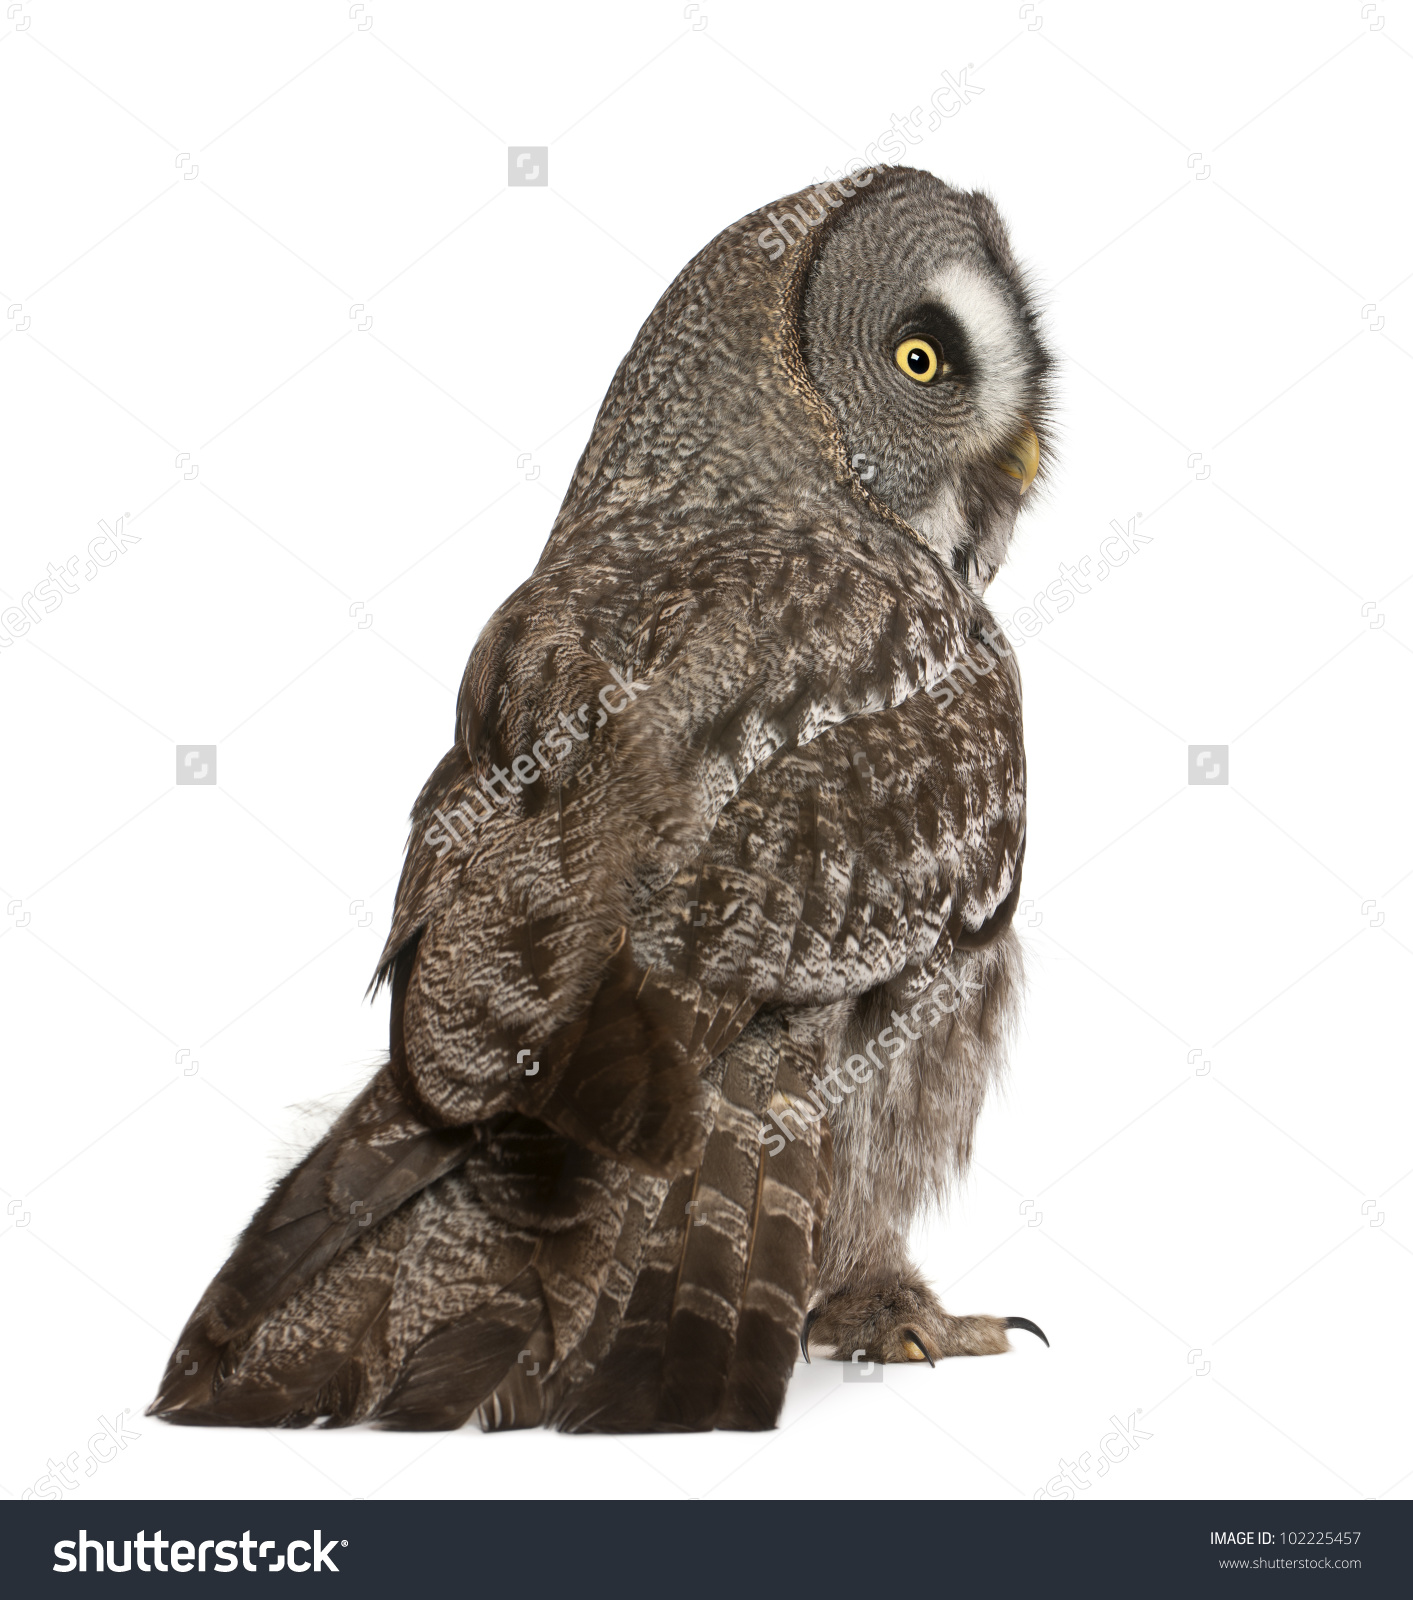 Great Grey Owl Or Lapland Owl, Strix Nebulosa, A Very Large Owl.